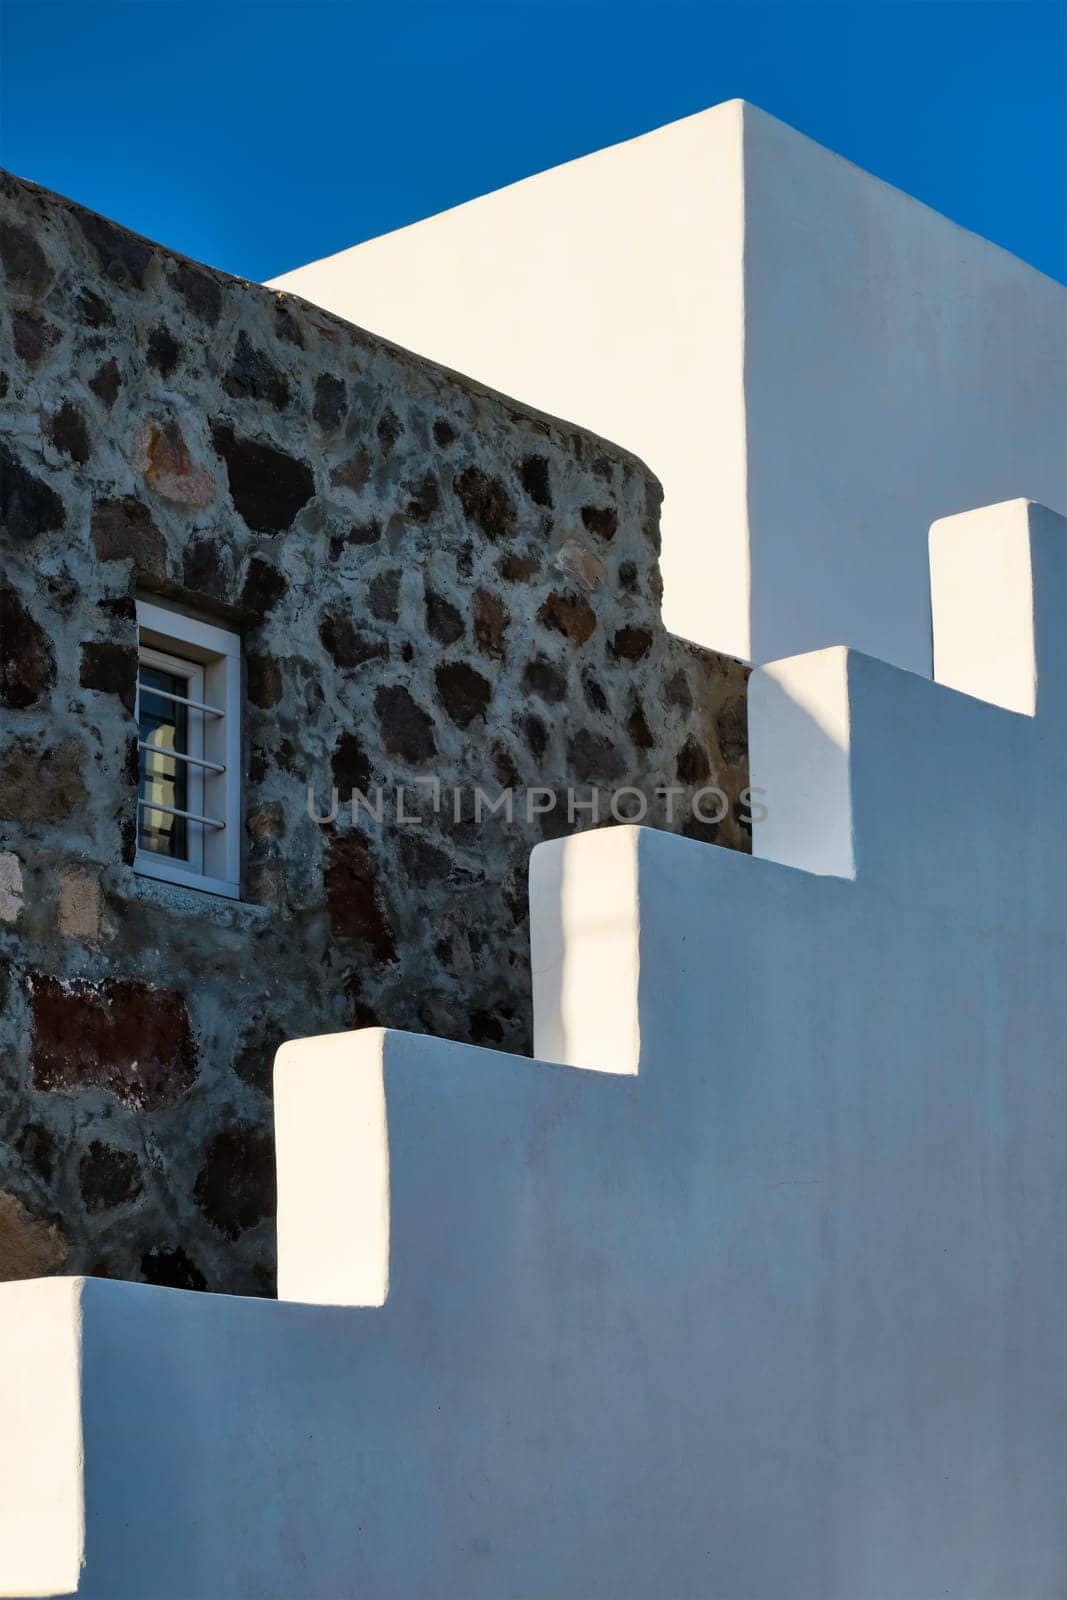 Greek architecture abstract background - whitewashed house with stairs. Milos island, Greece by dimol